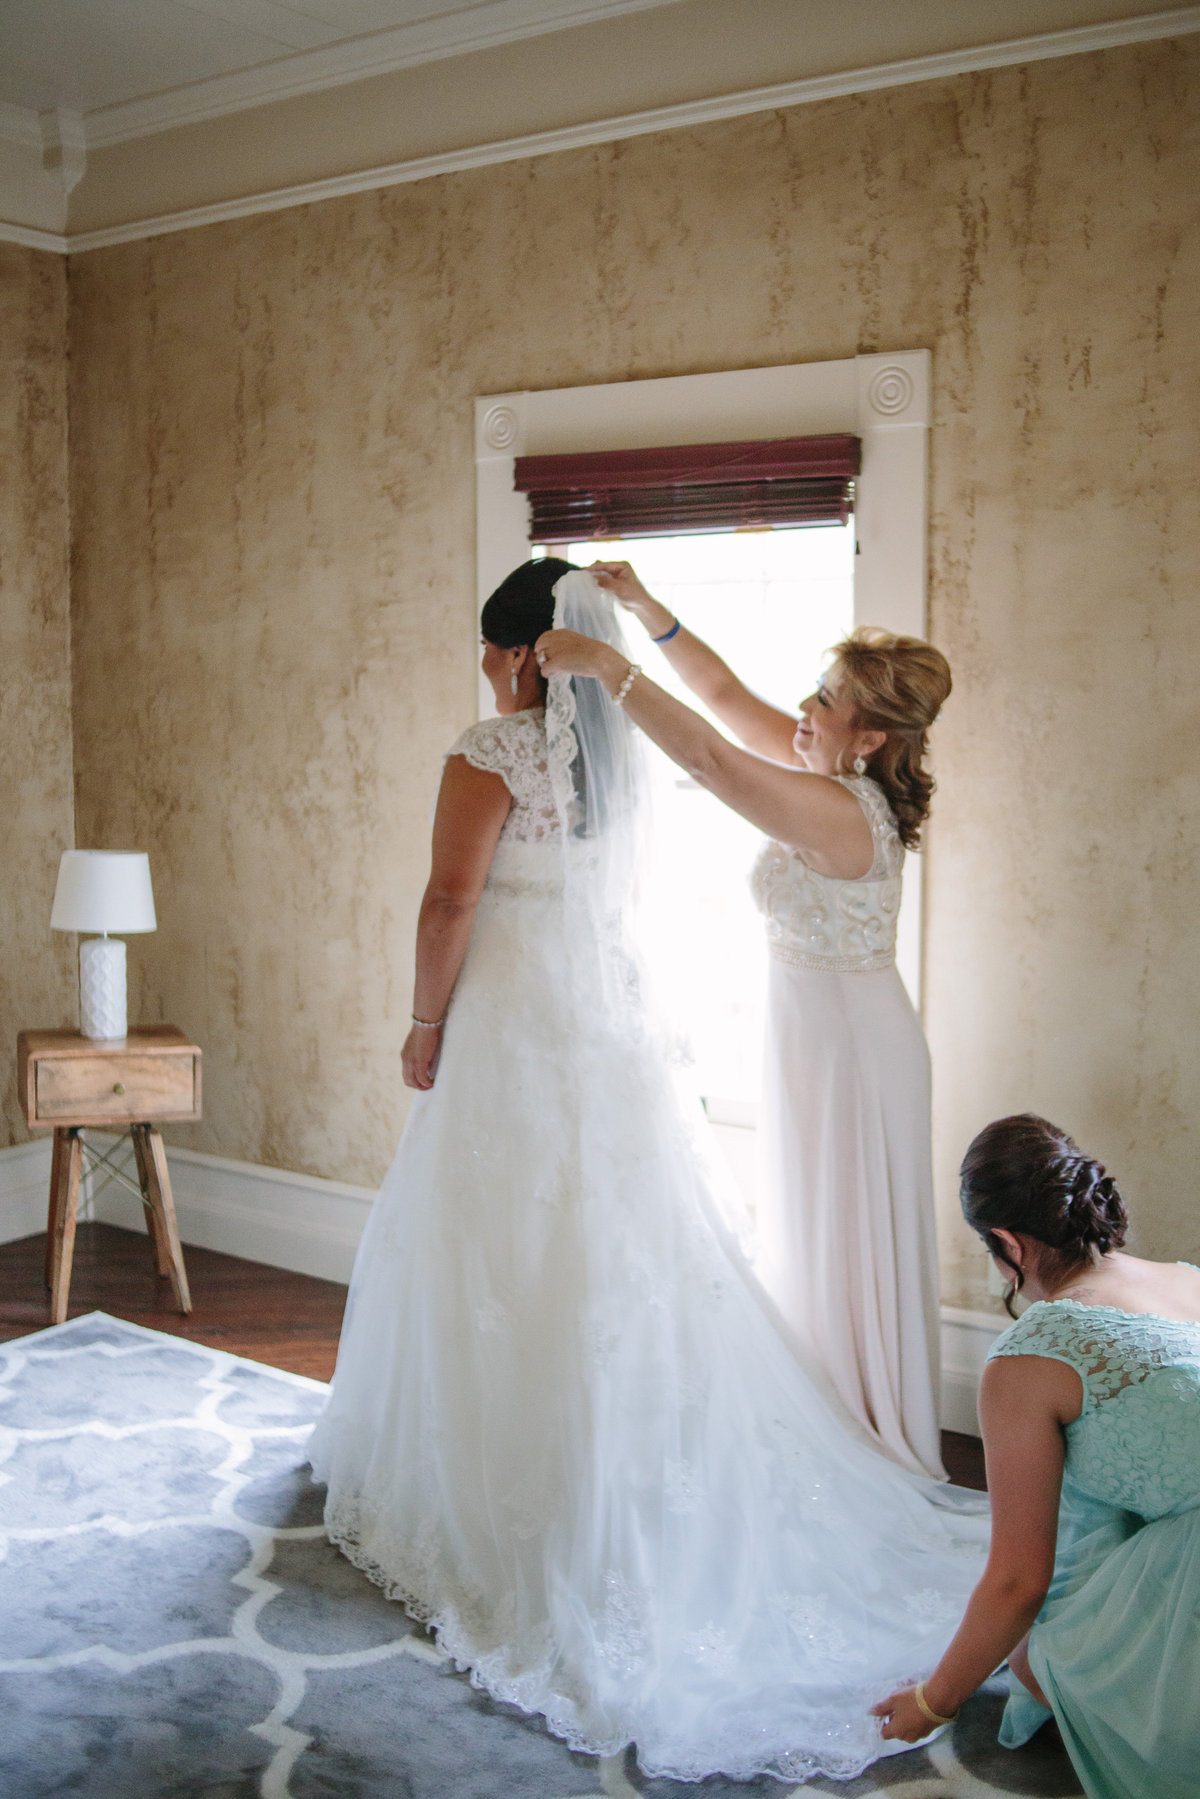 Mother of bride puts veil on her daughter just before getting ready for Texas Hill Country wedding ceremony.